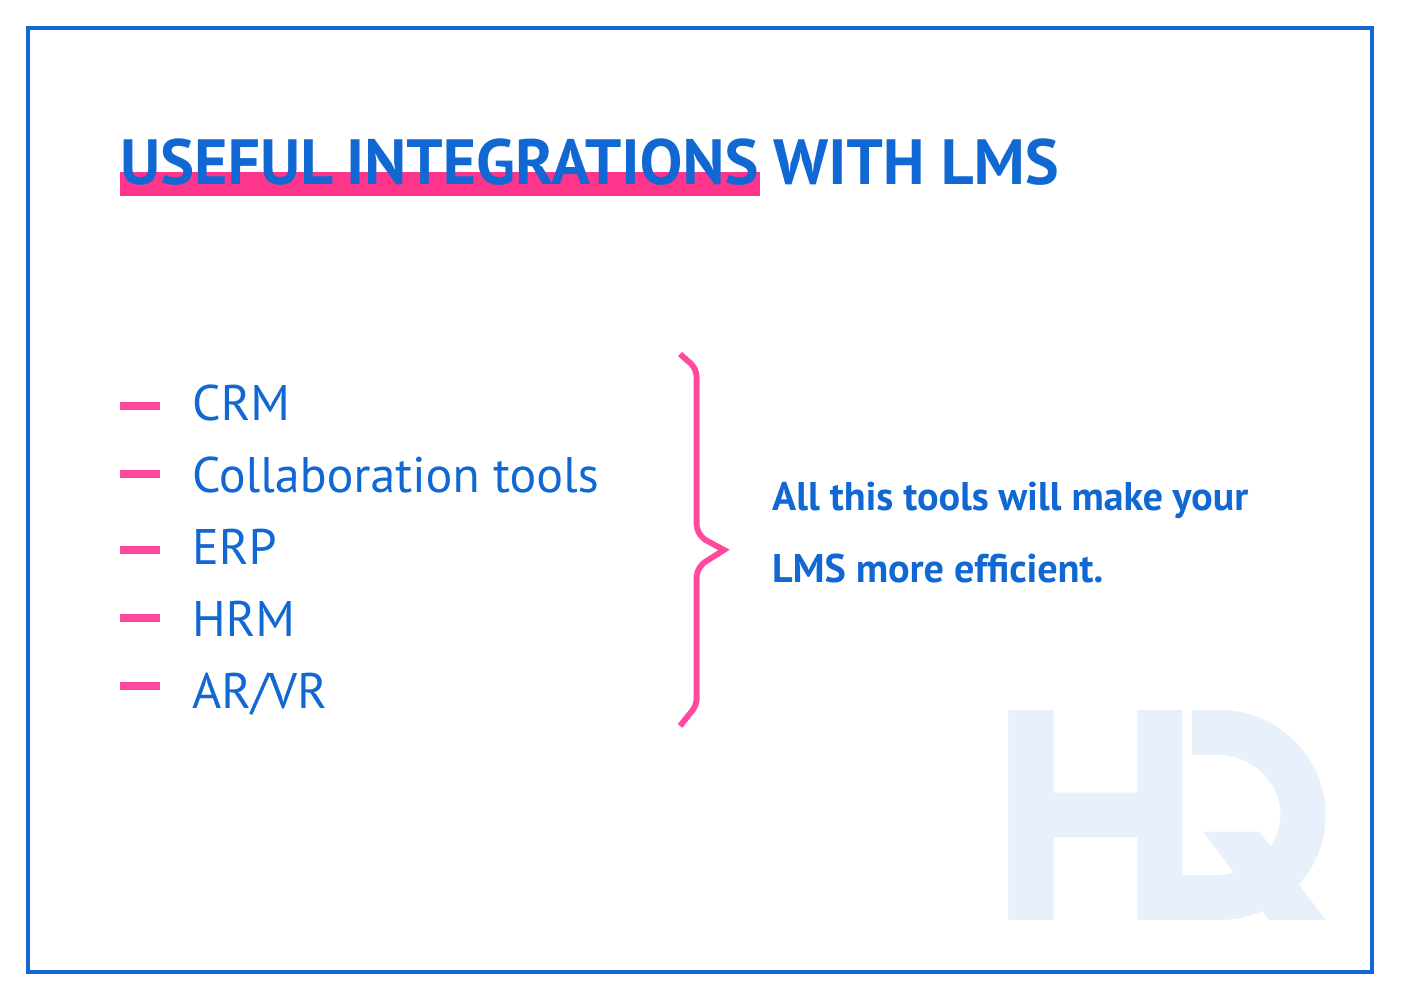 10 useful integrations with LMS - How to Create LMS for Employee Training + Case Studies Inside